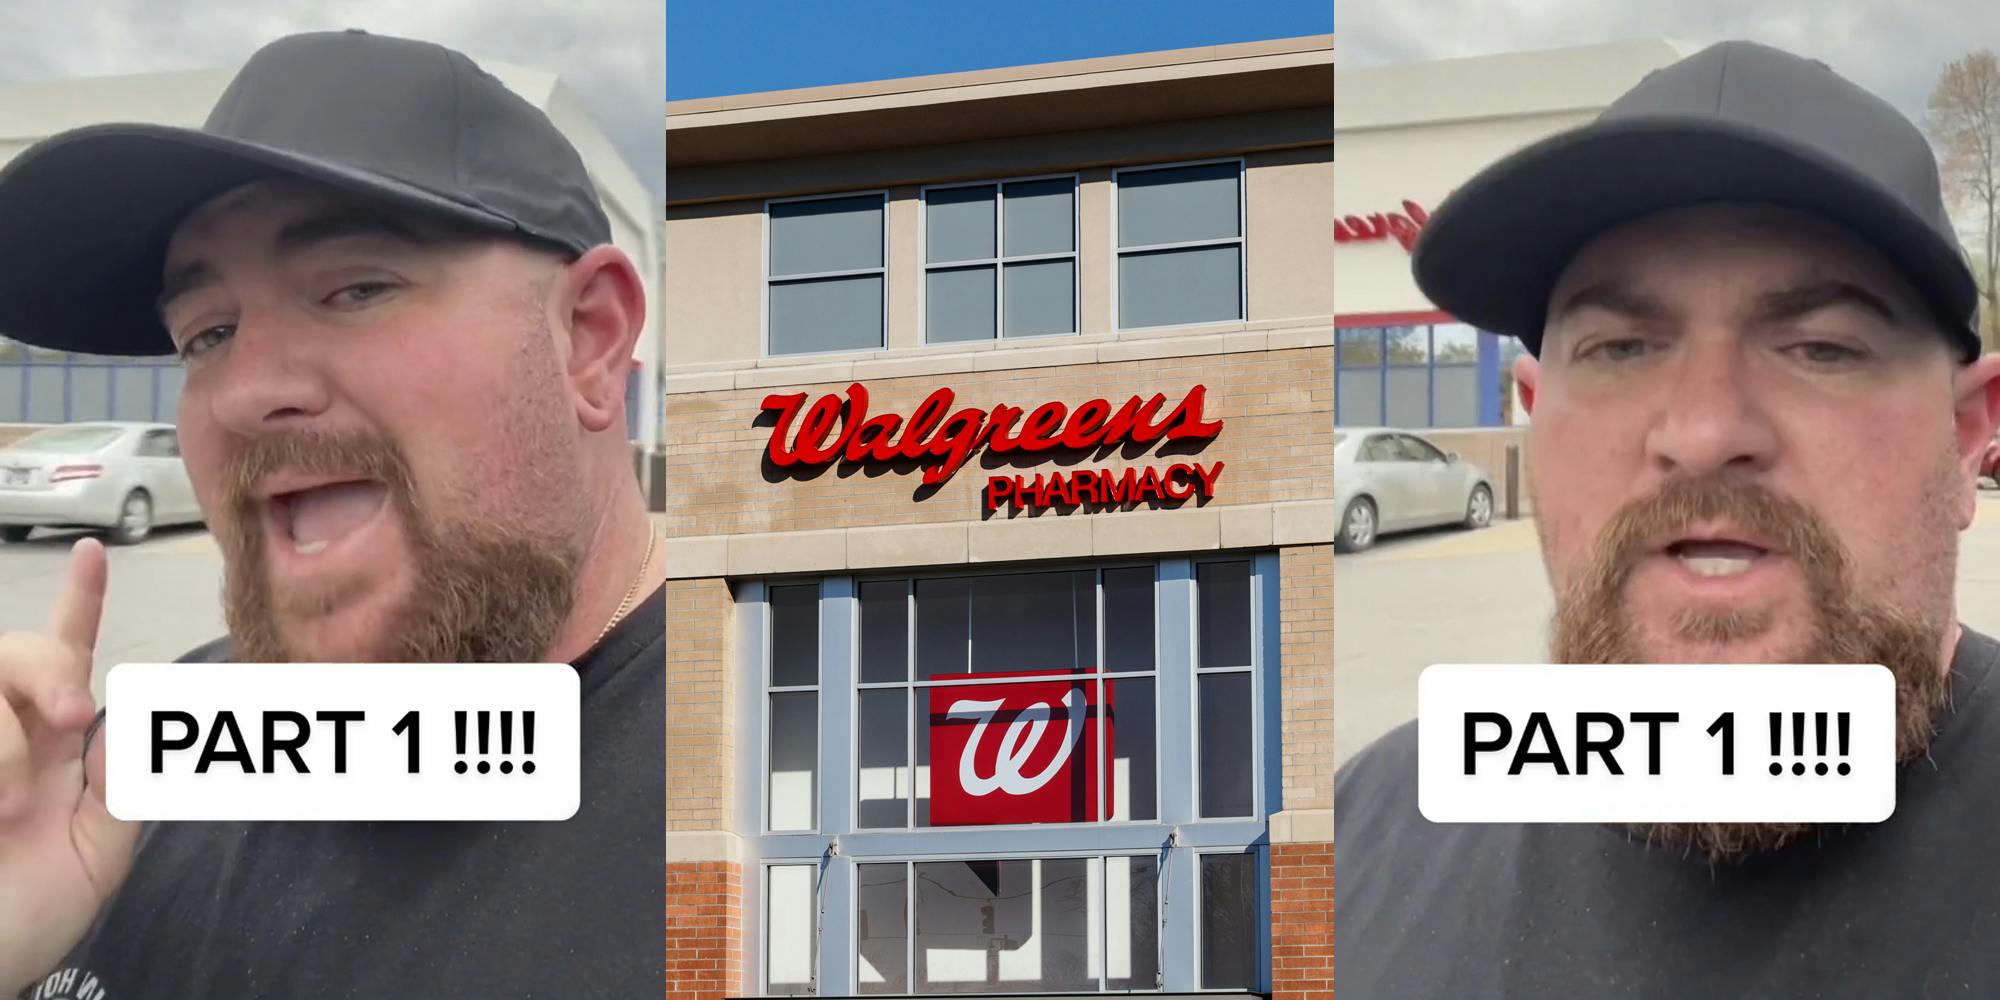 person speaking outside Walgreens with caption "PART 1!!!!" (l) Walgreens Pharmacy building with sign (c) person speaking outside Walgreens with caption "PART 1!!!!" (r)